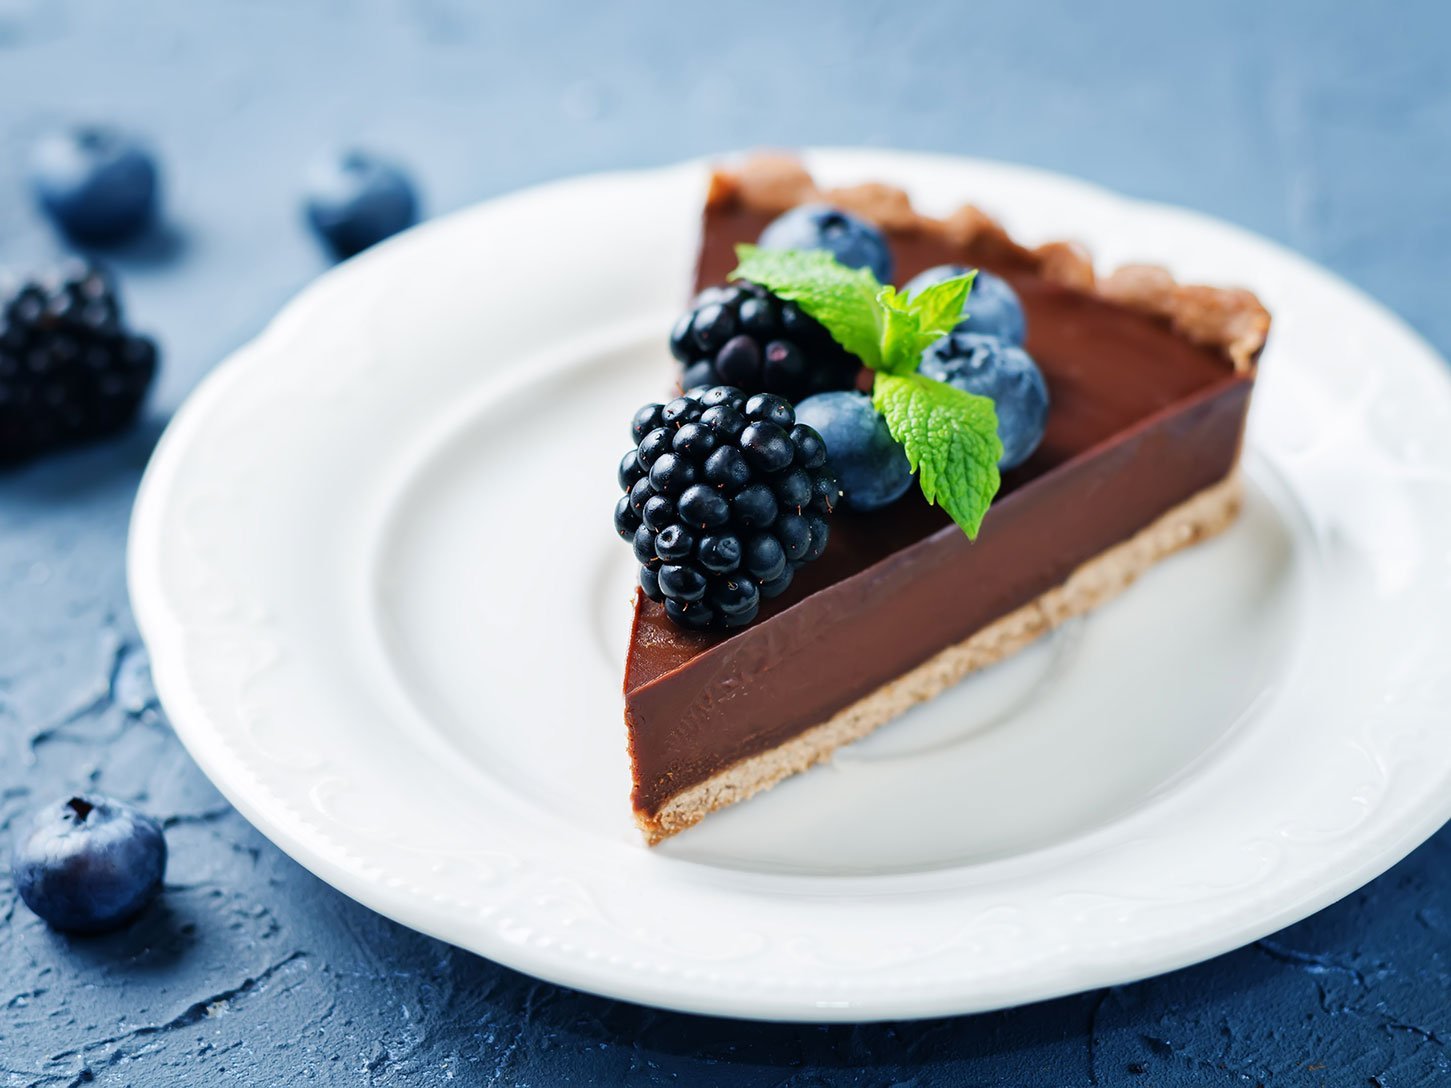 Chocolate Tart With Blackberries And Blueberries